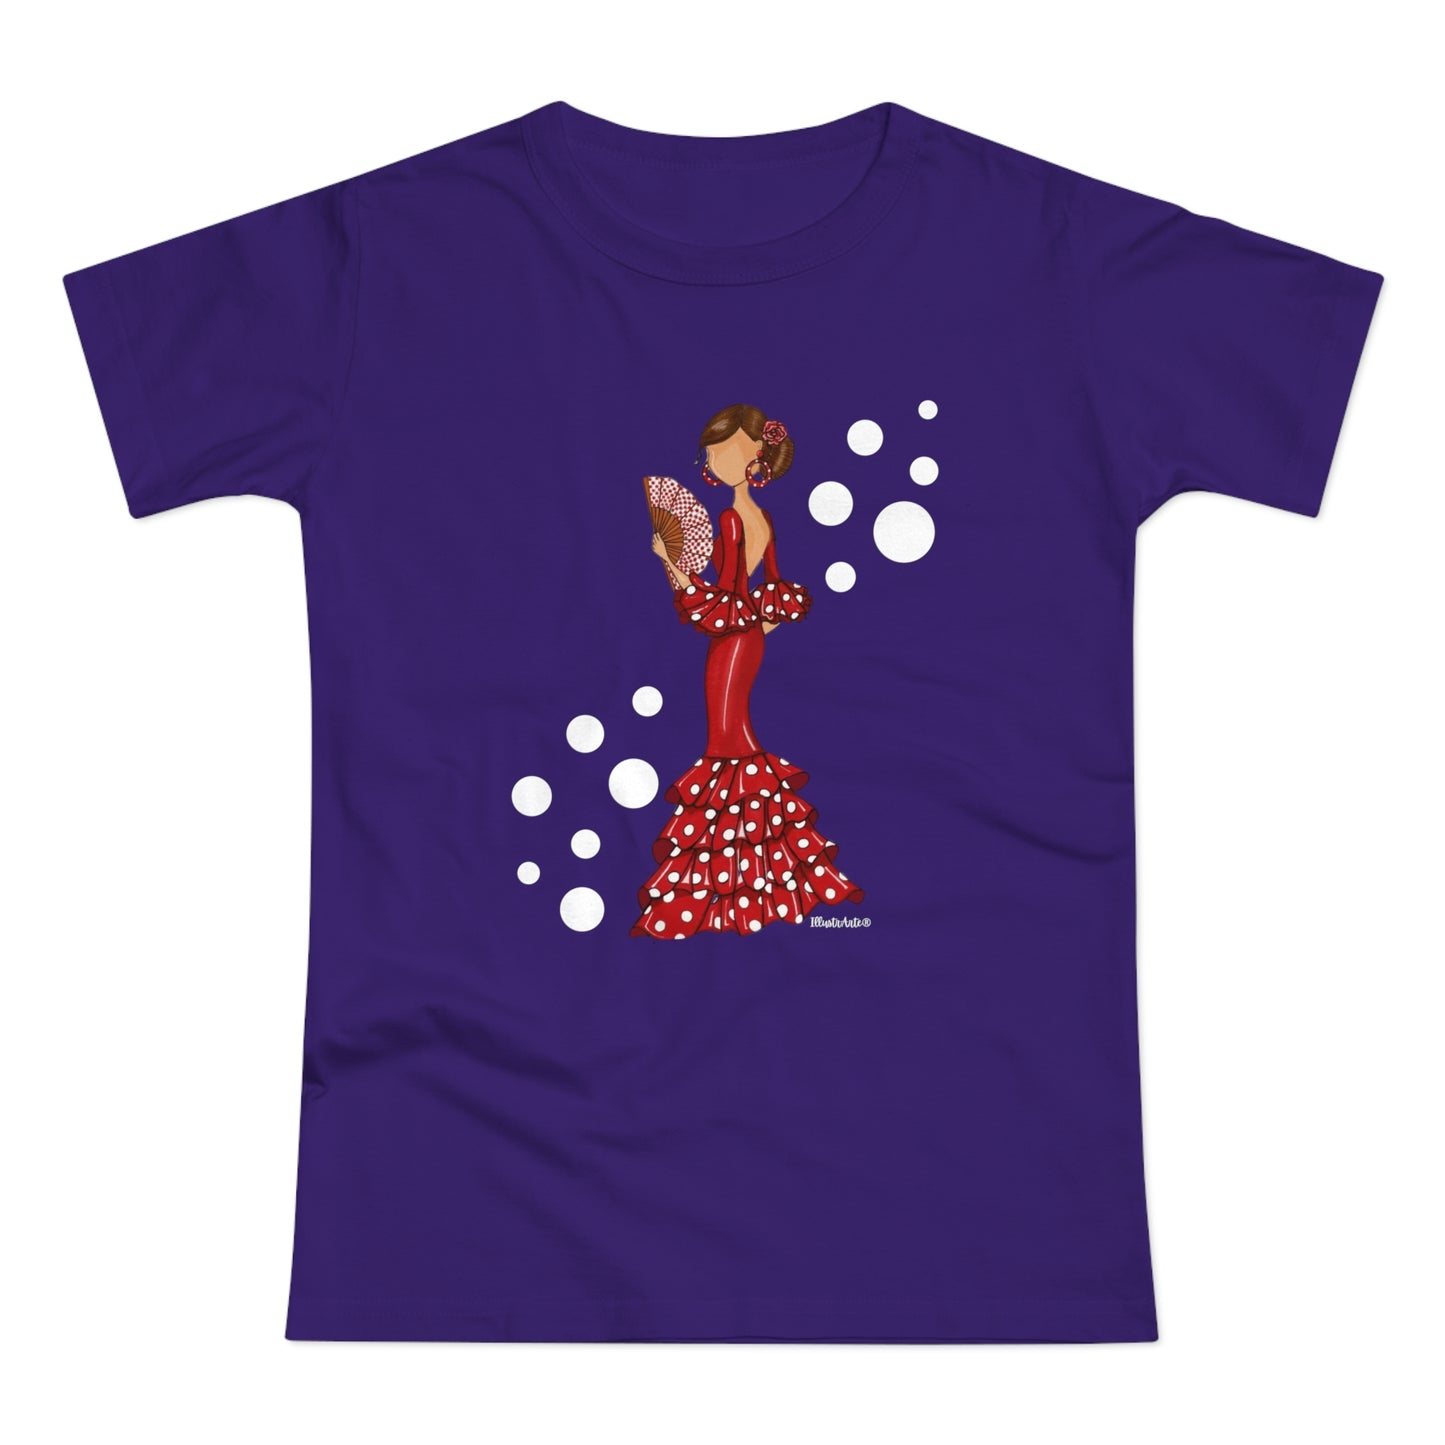 a purple t - shirt with a woman in a polka dot dress